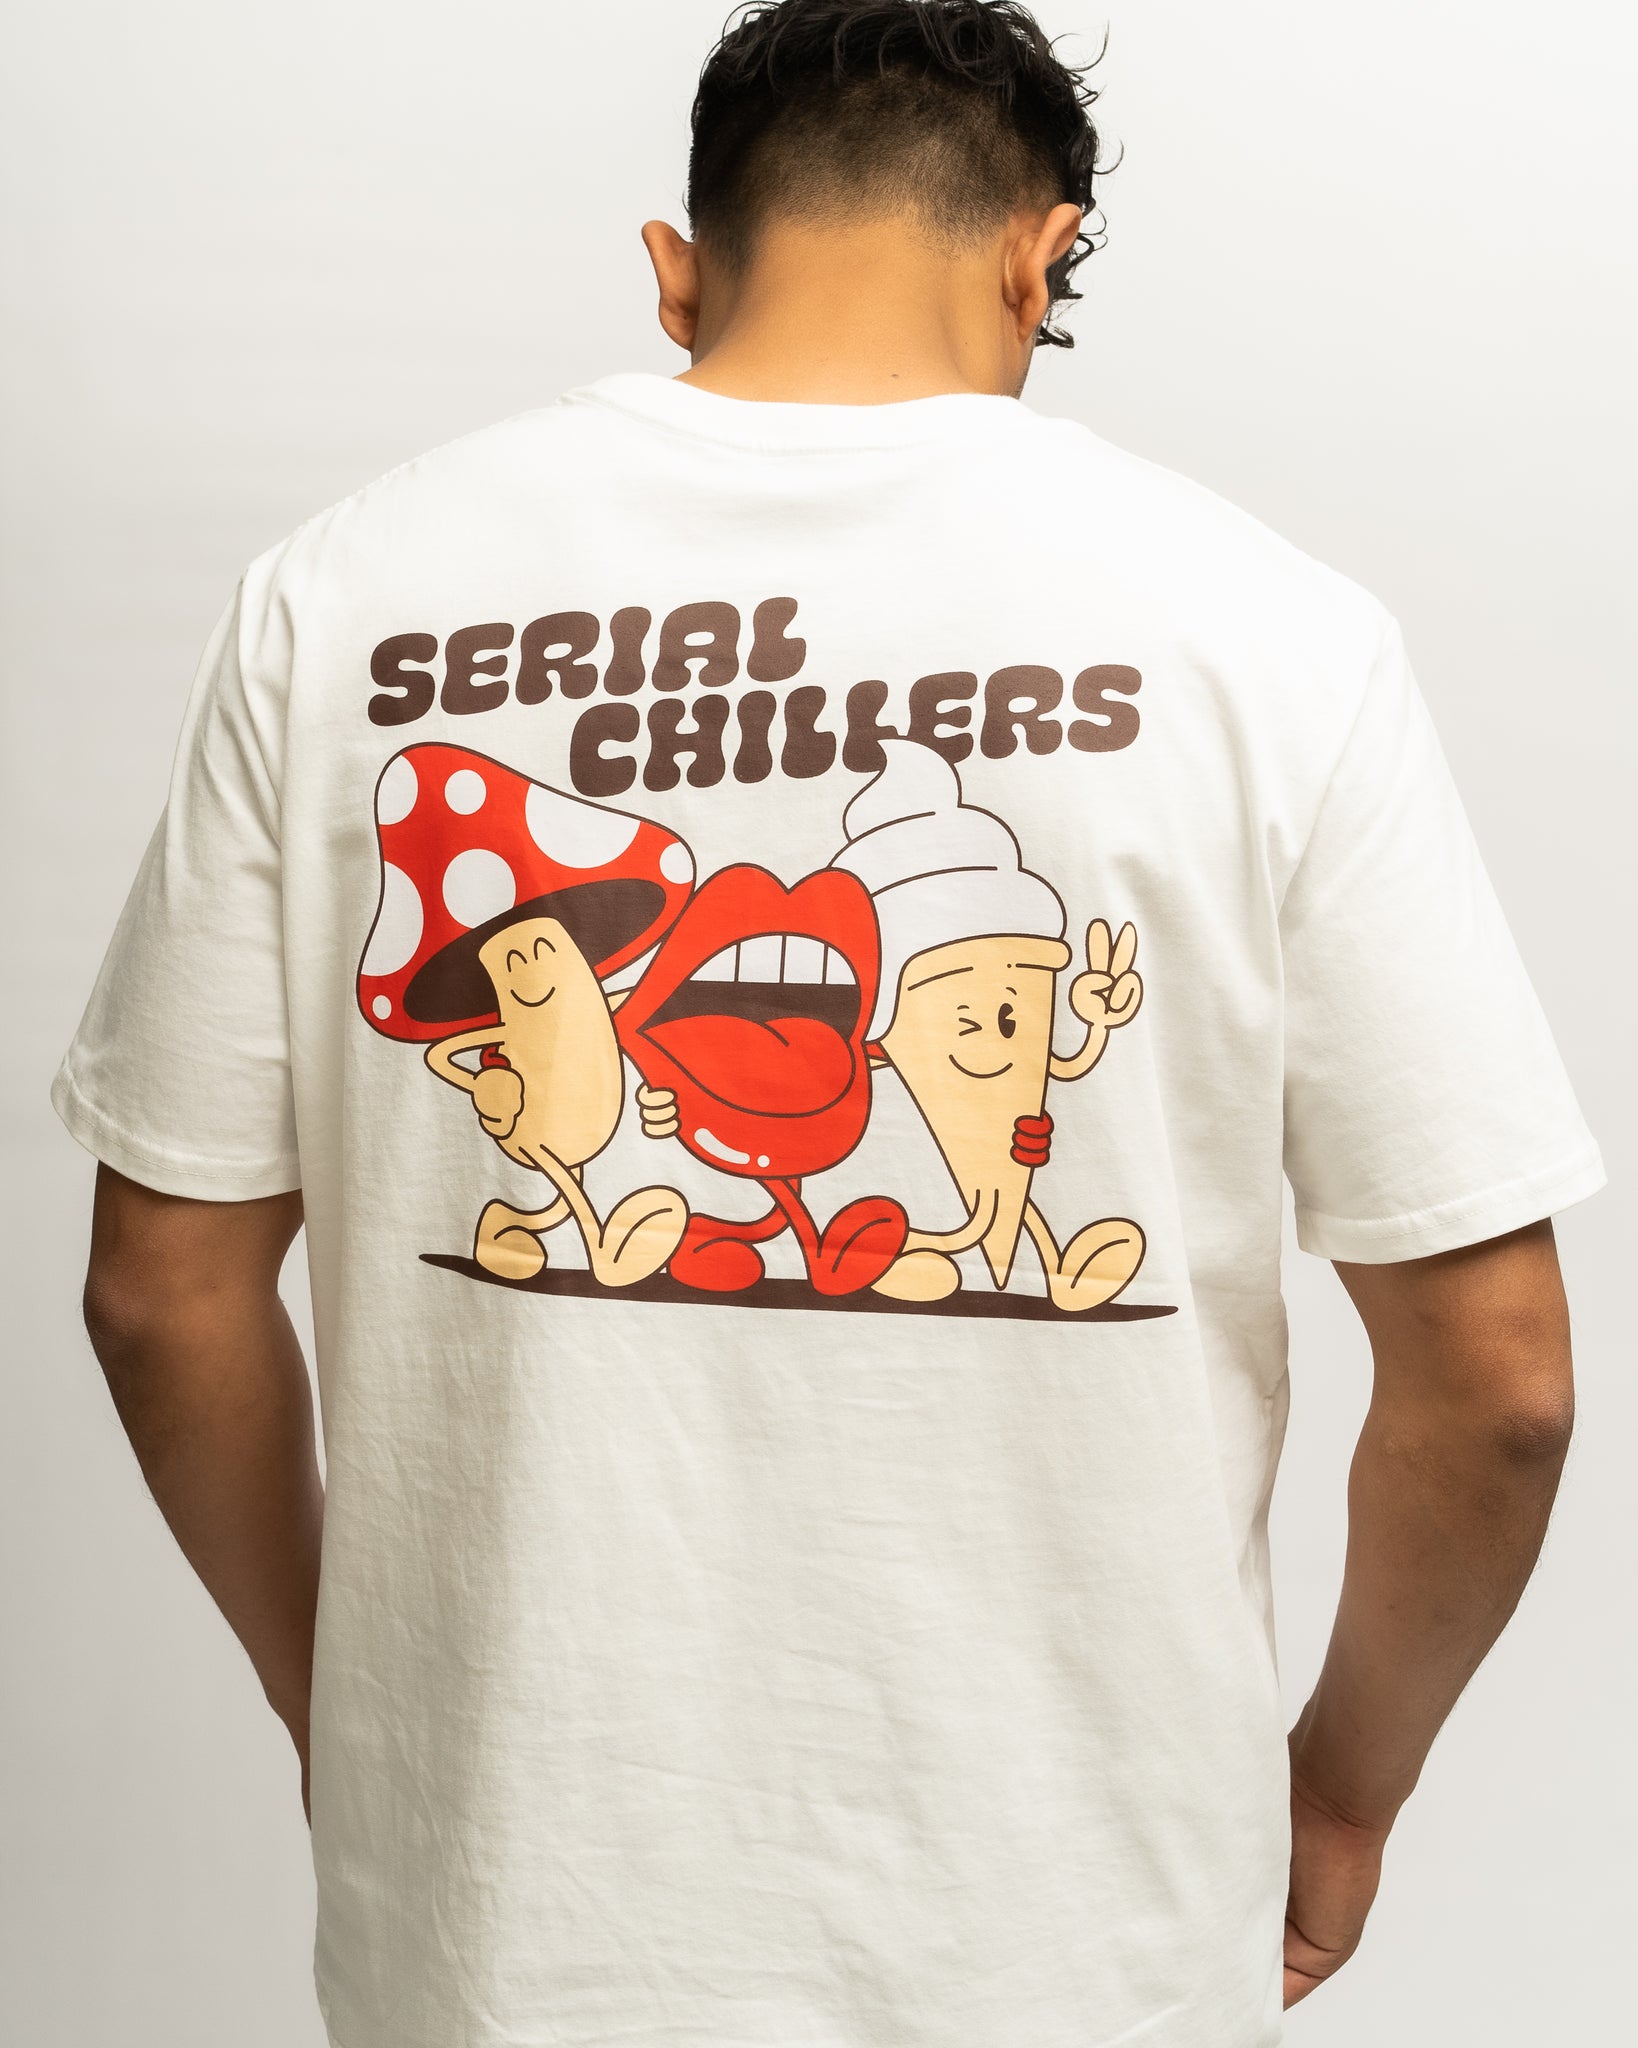 Serial Chillers Tee - Cream